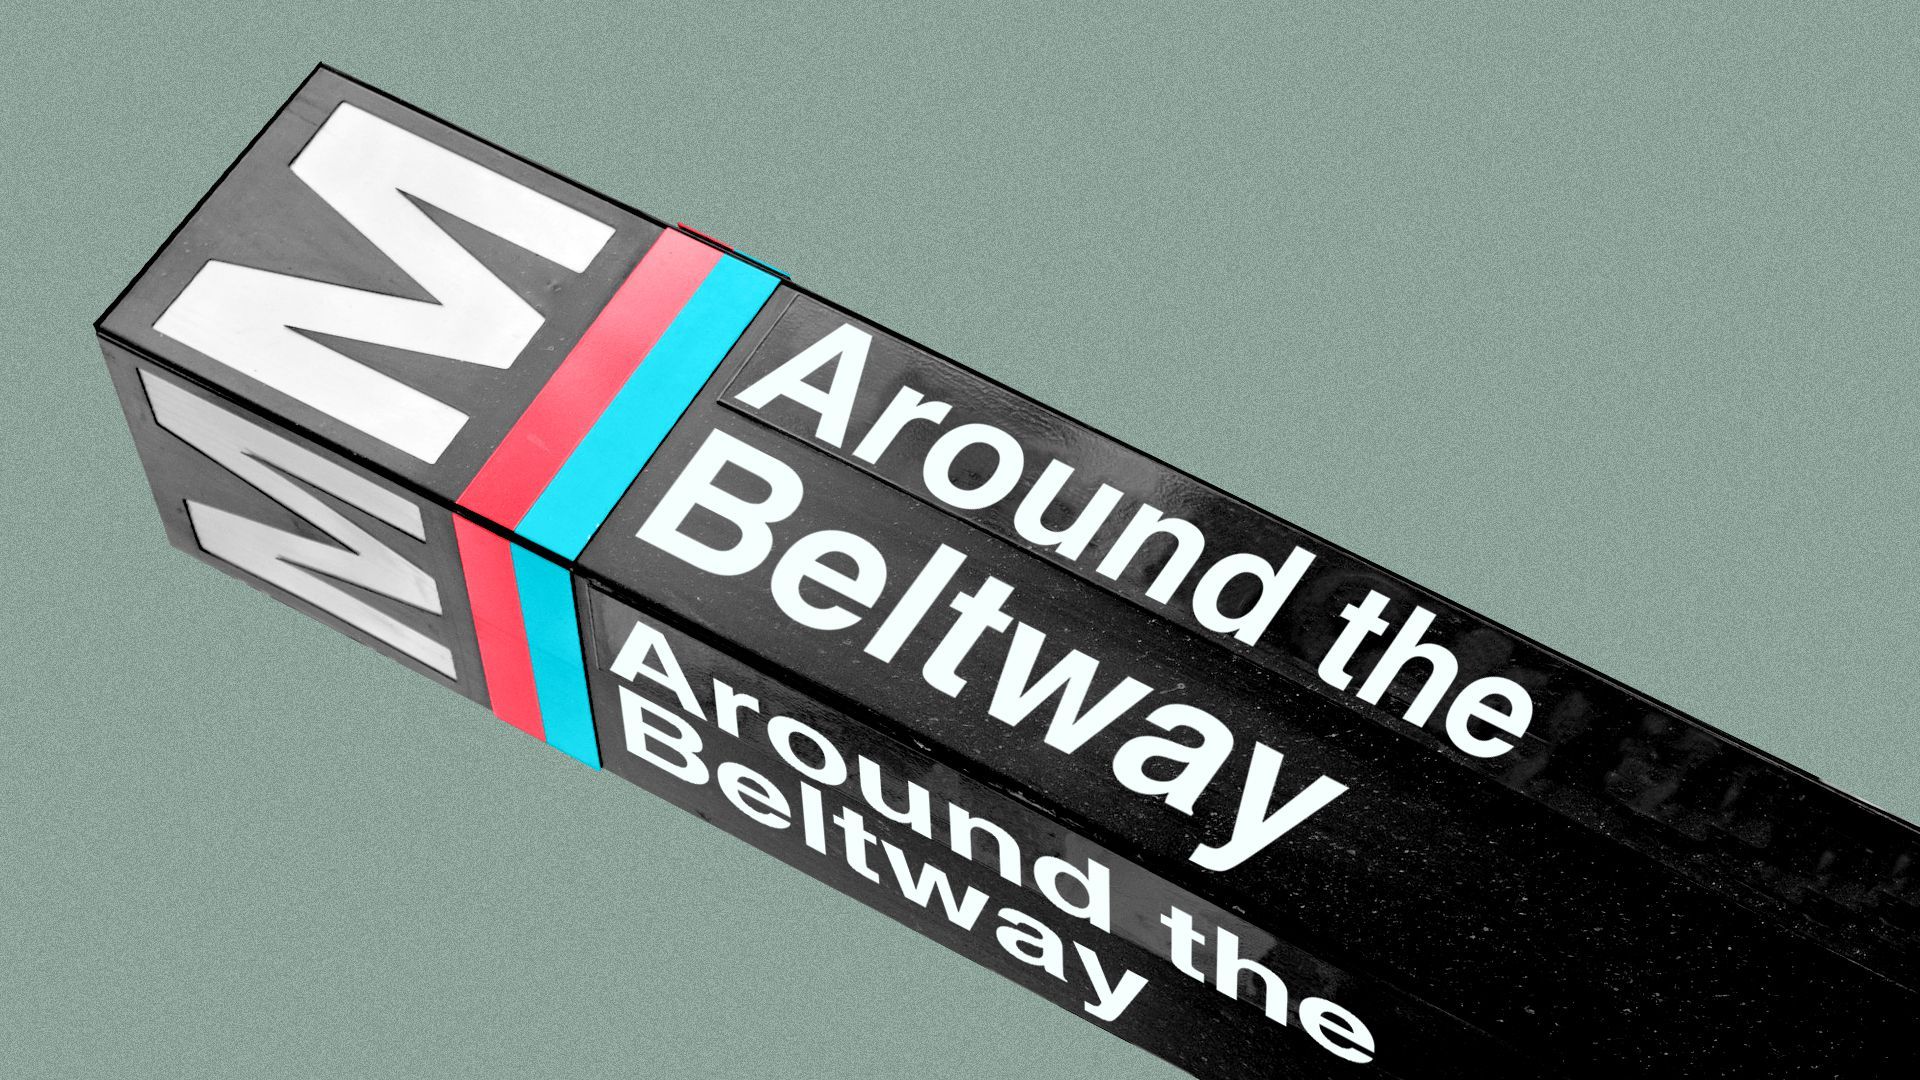 Illustration of a Washington Metro sign edited to read "Around the Beltway."